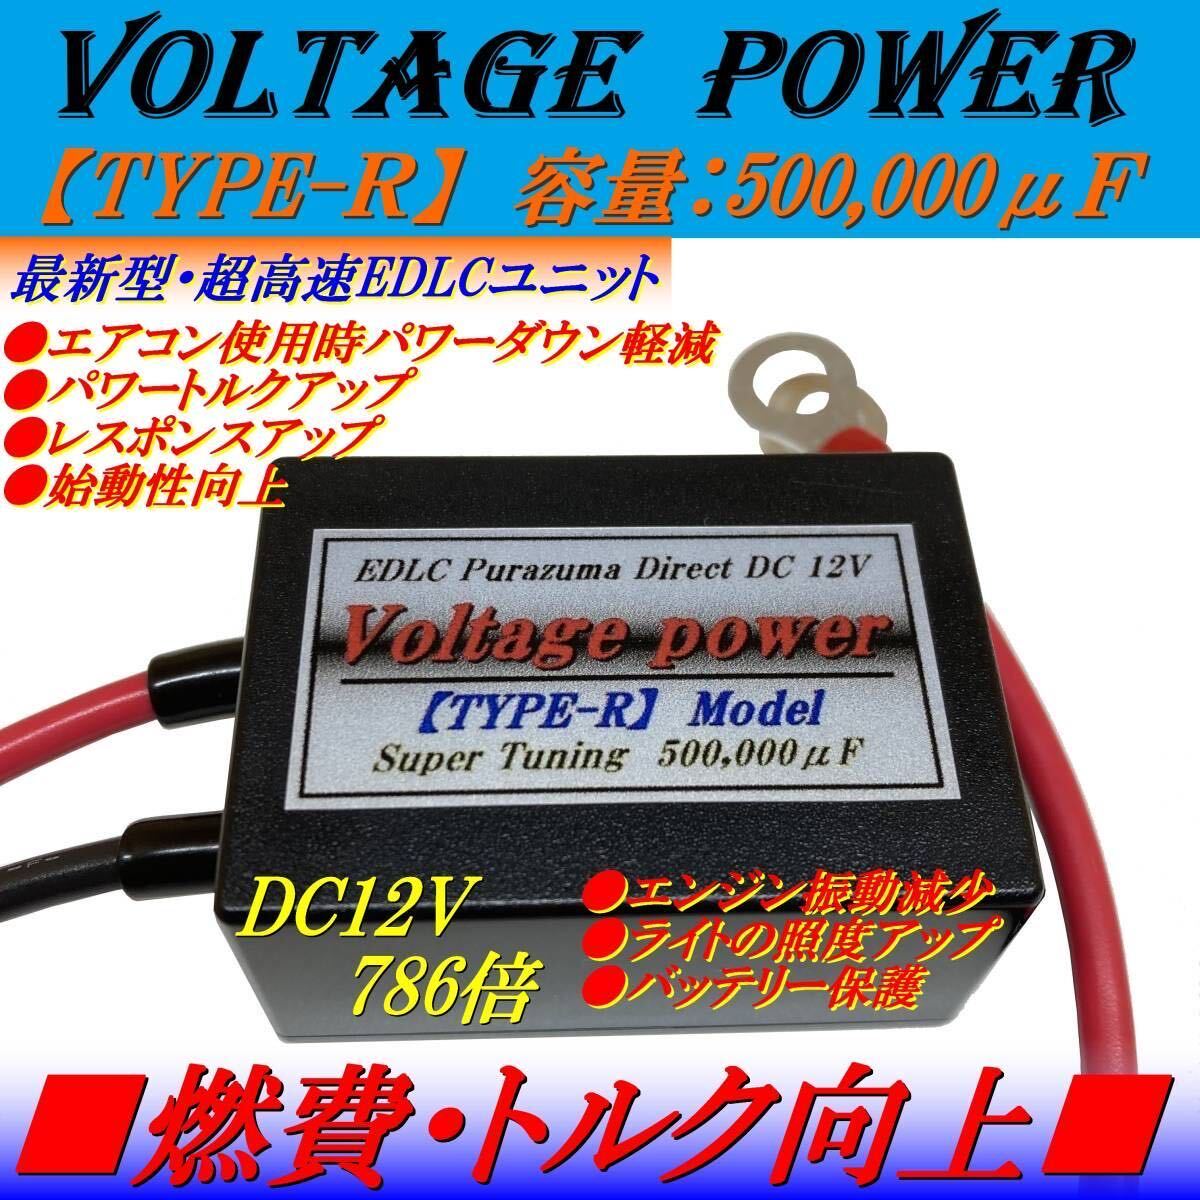 * noise removal . power supply strengthen power . staggering!798 times. high speed newest EDLC0.5F installing! Ultra C-Max/E-PRO pressure .. engine power & torque * fuel economy improvement a